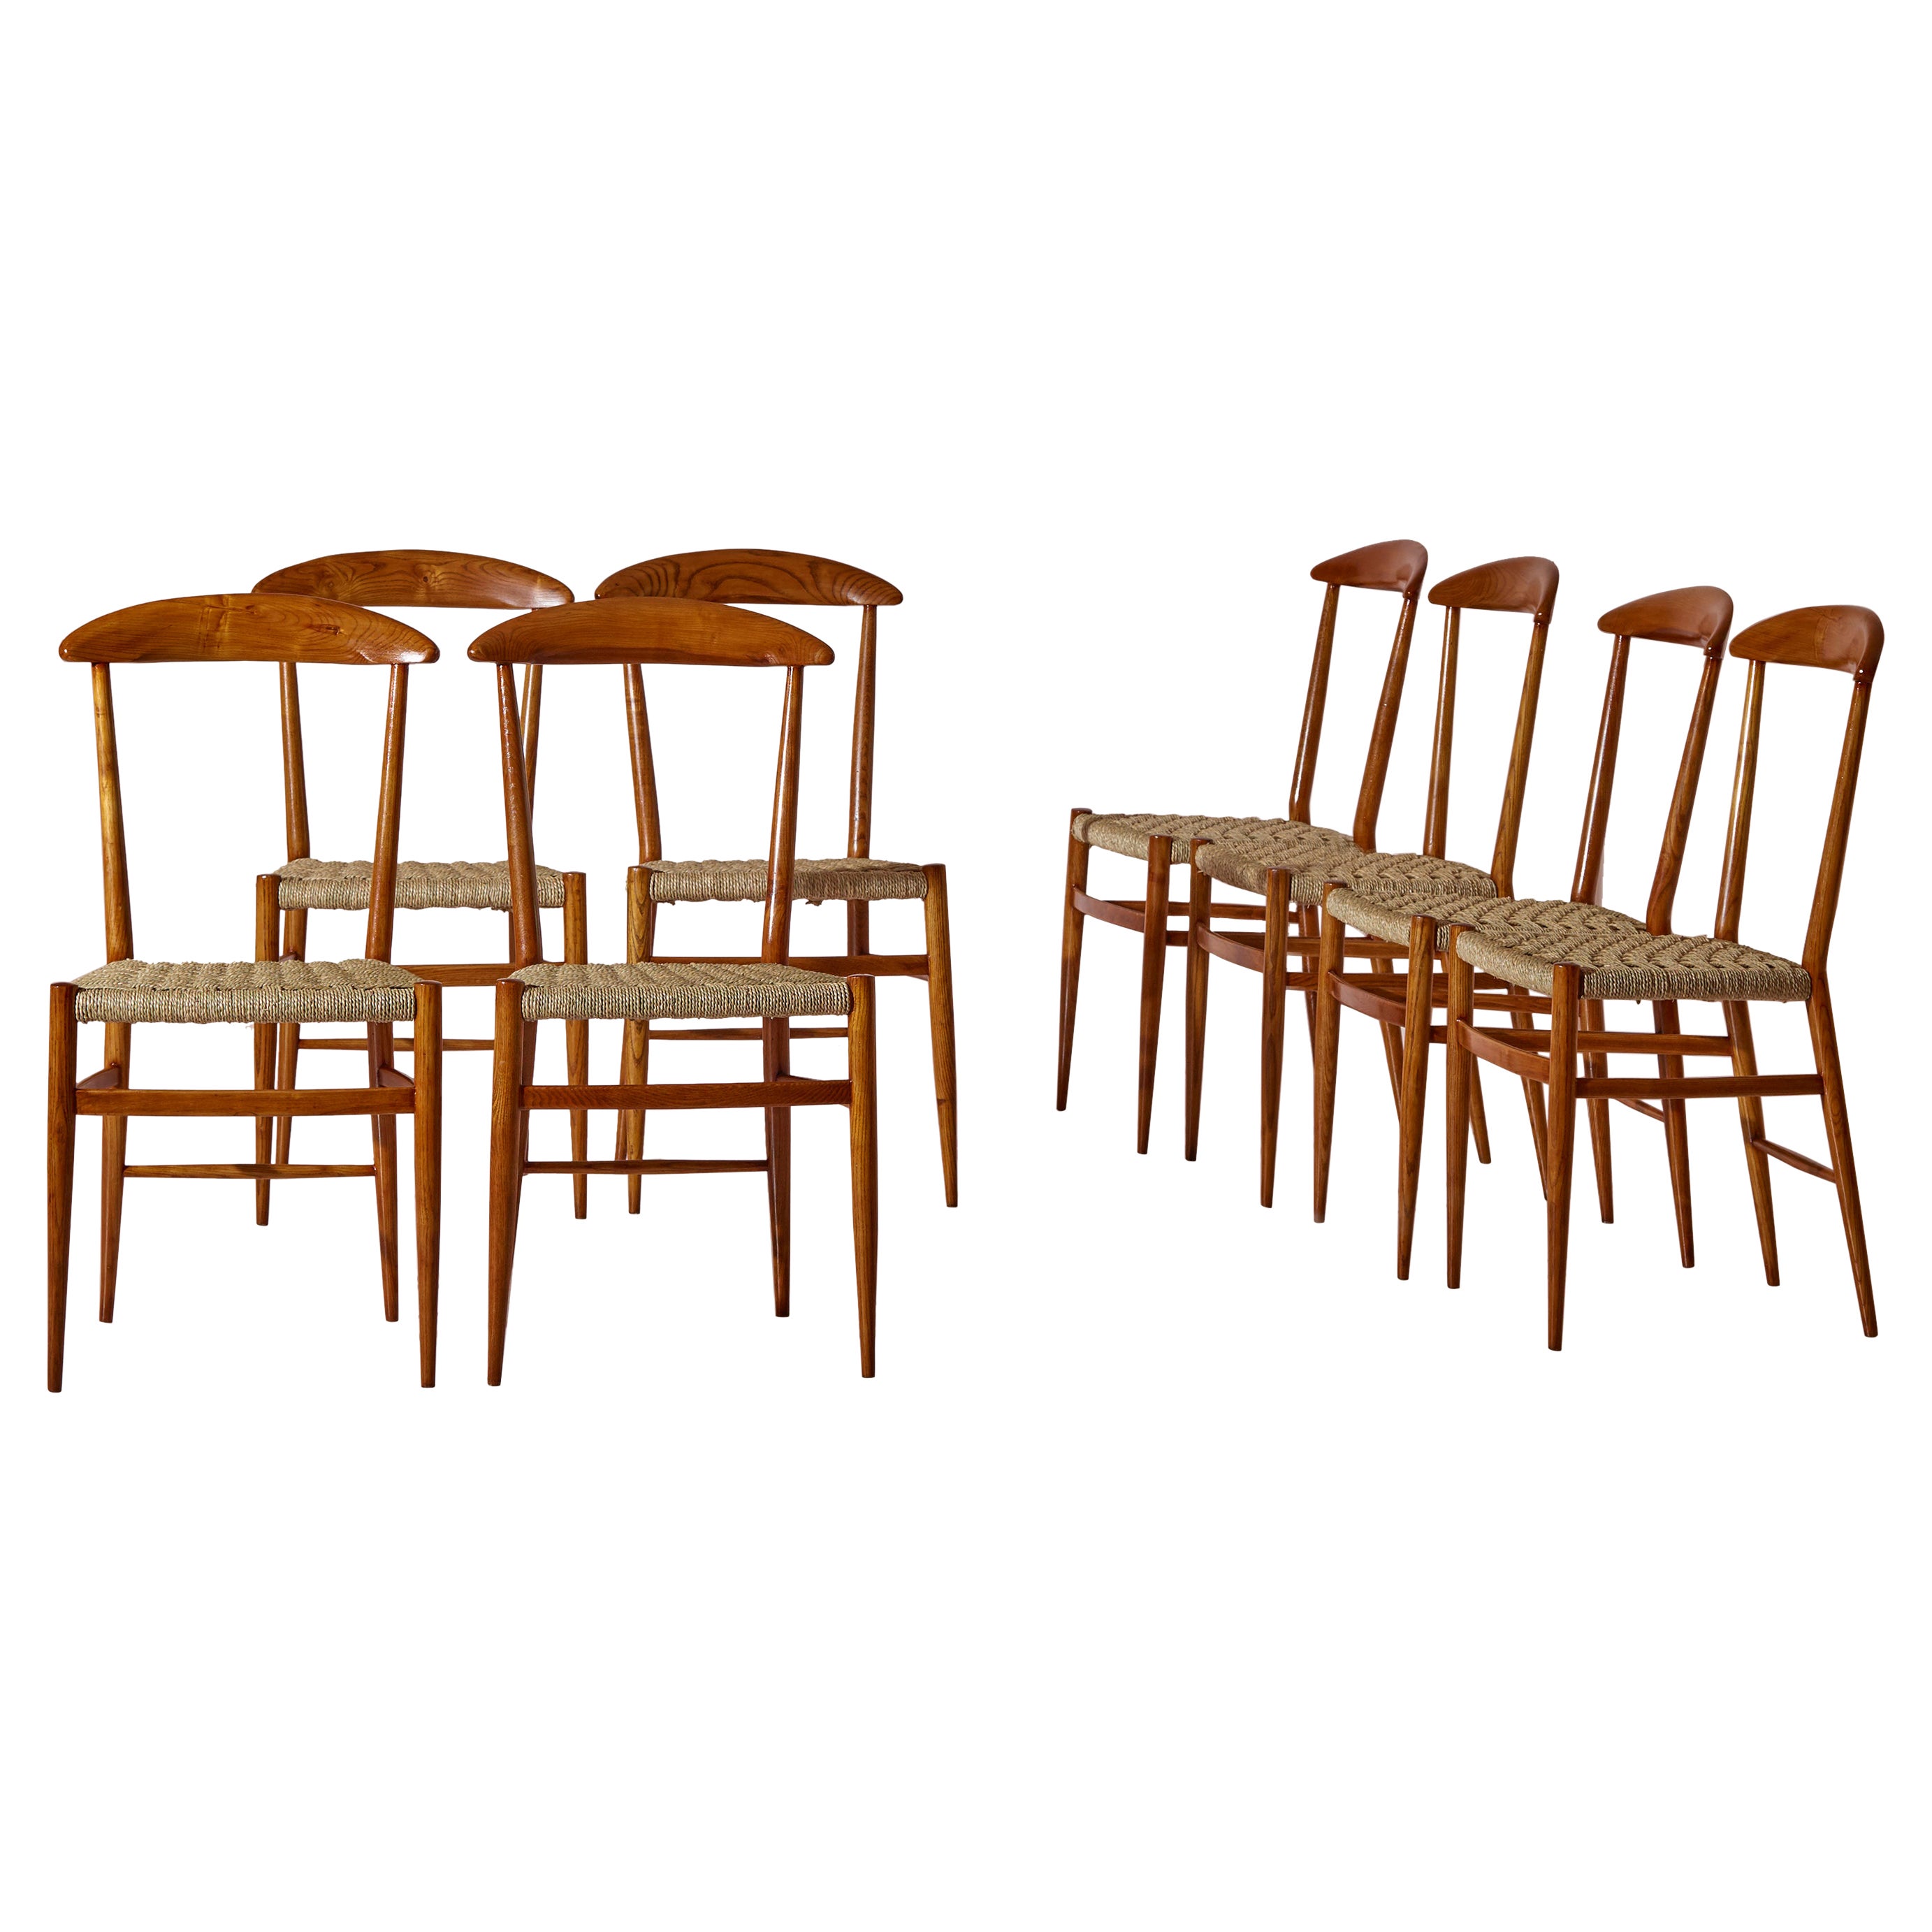 Guido Chiappe set of 8 dining chairs made of beech and rope, Chiavari, 1950s For Sale